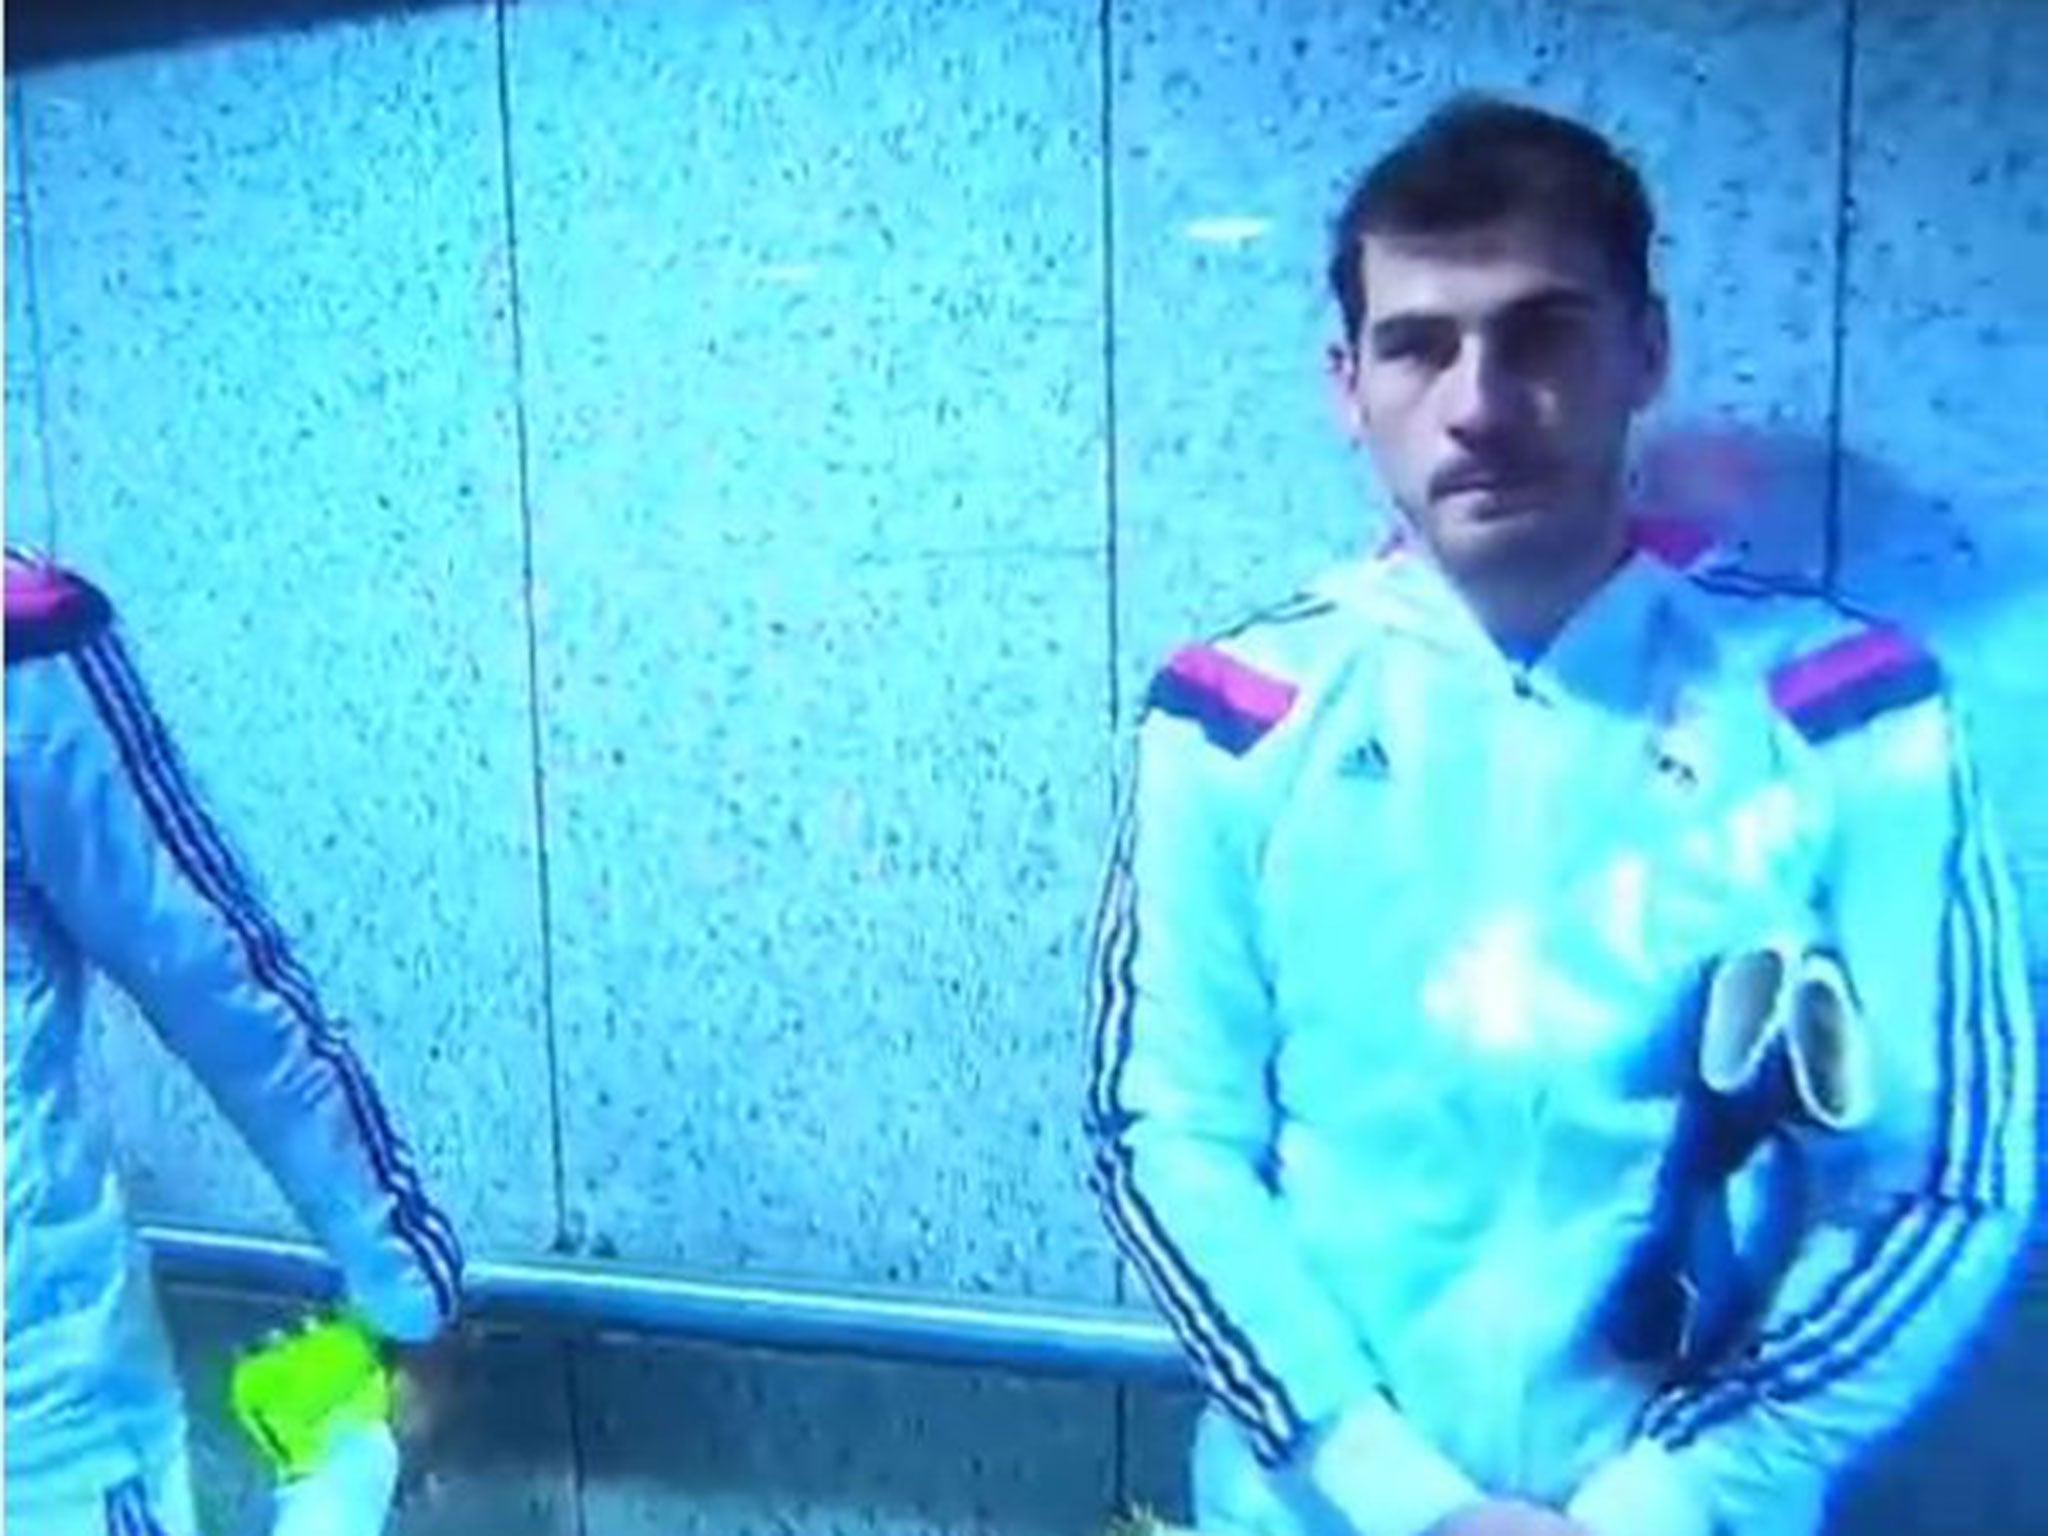 Iker Casillas hilariously snubbed by Real Madrid team-mate Alvaro Arbeloa